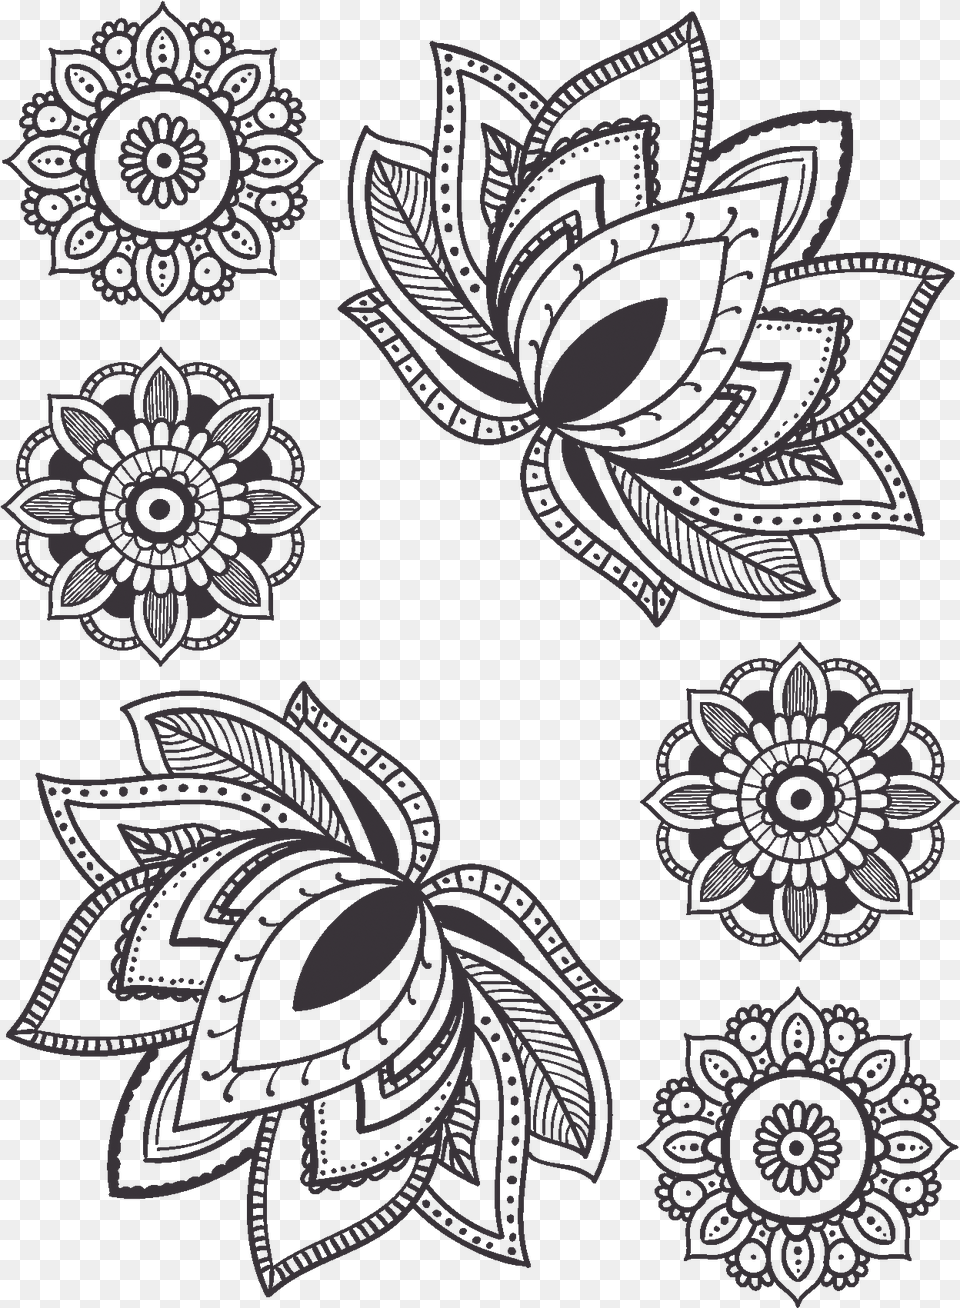 Water Lilies And Mandalas Water Lily Flower Mandala, Pattern, Lace, Document, Id Cards Png